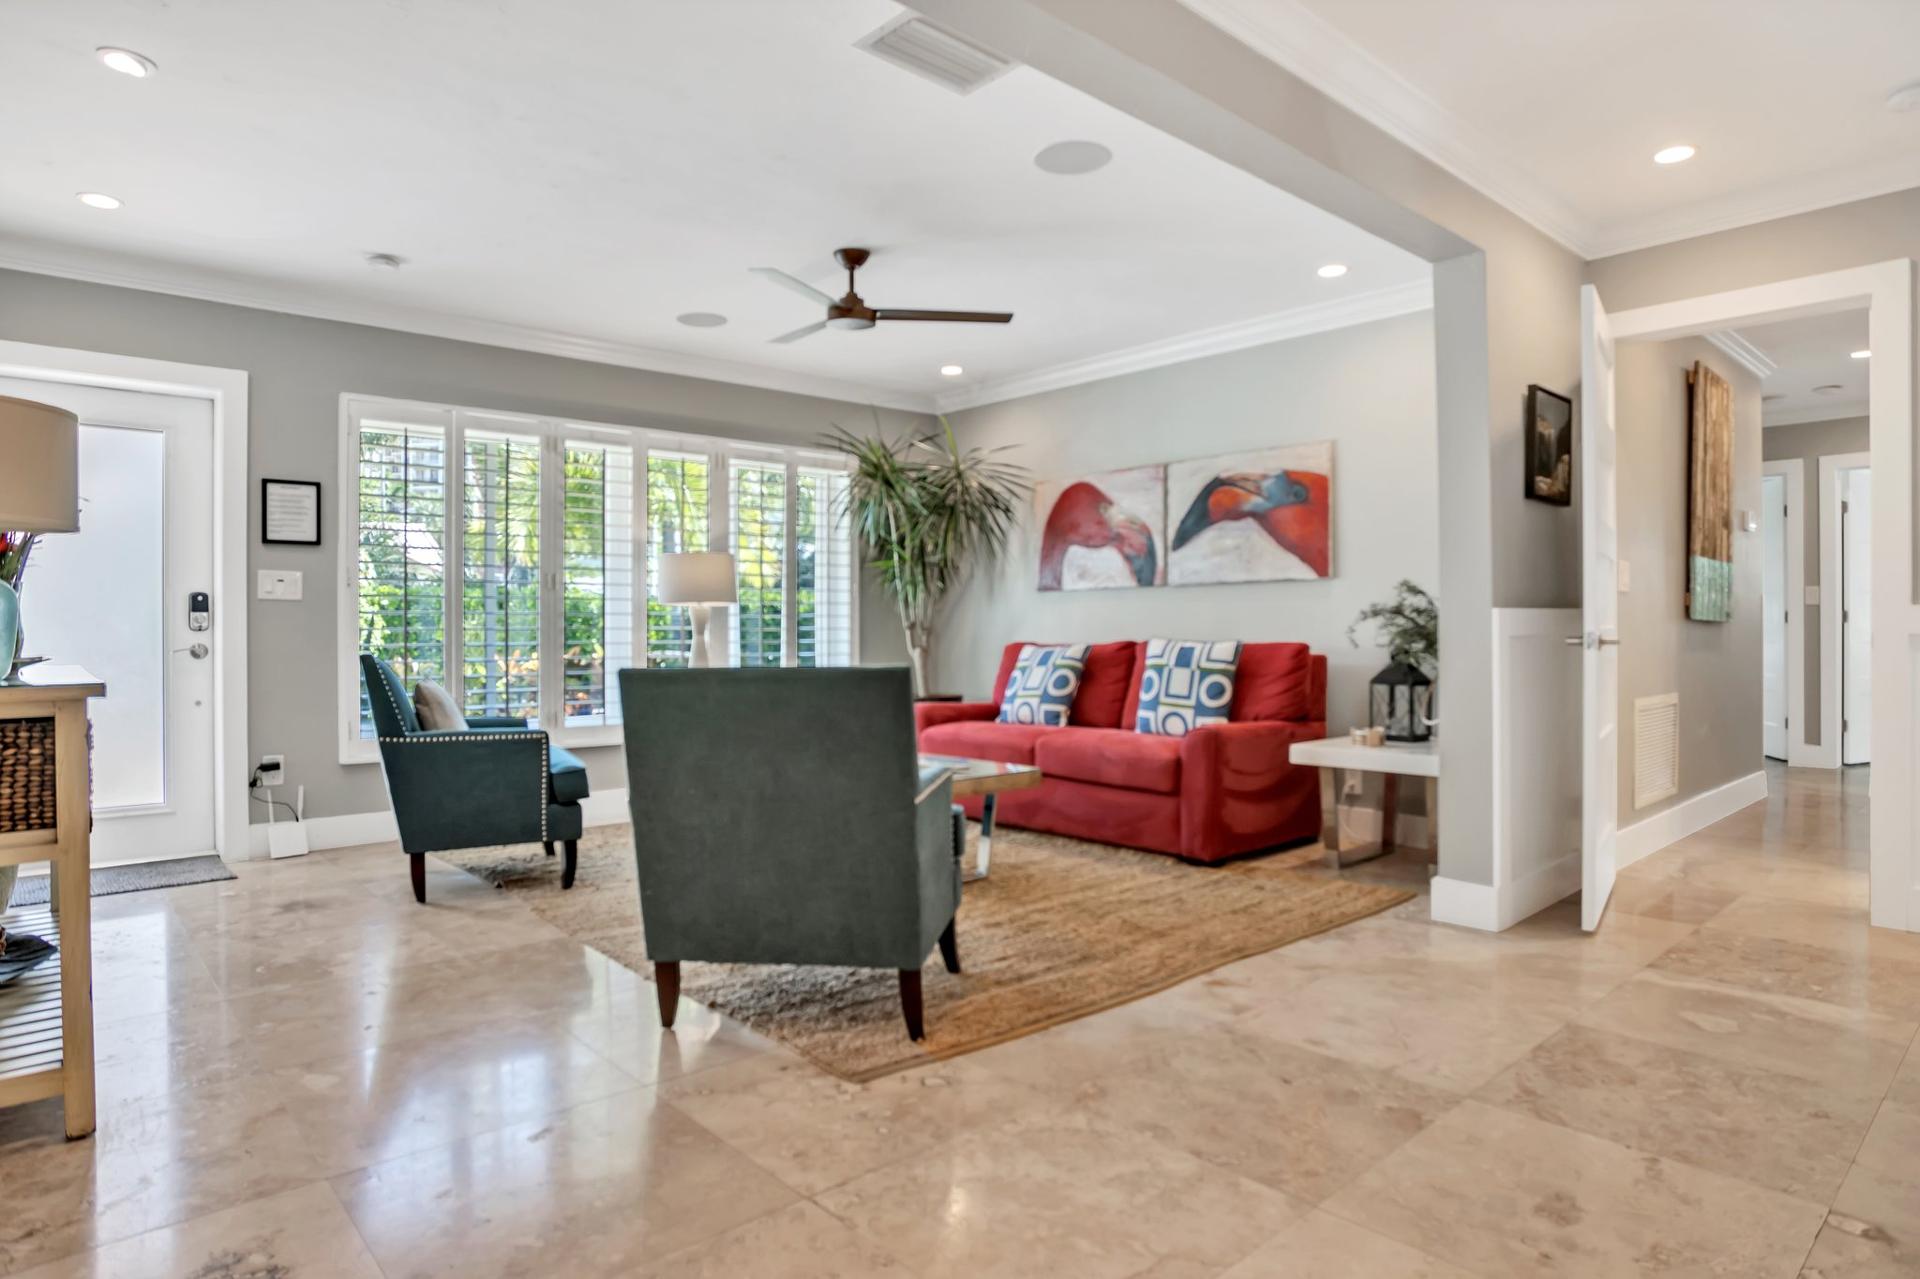 Vacation rental in Ft. Lauderdale Florida